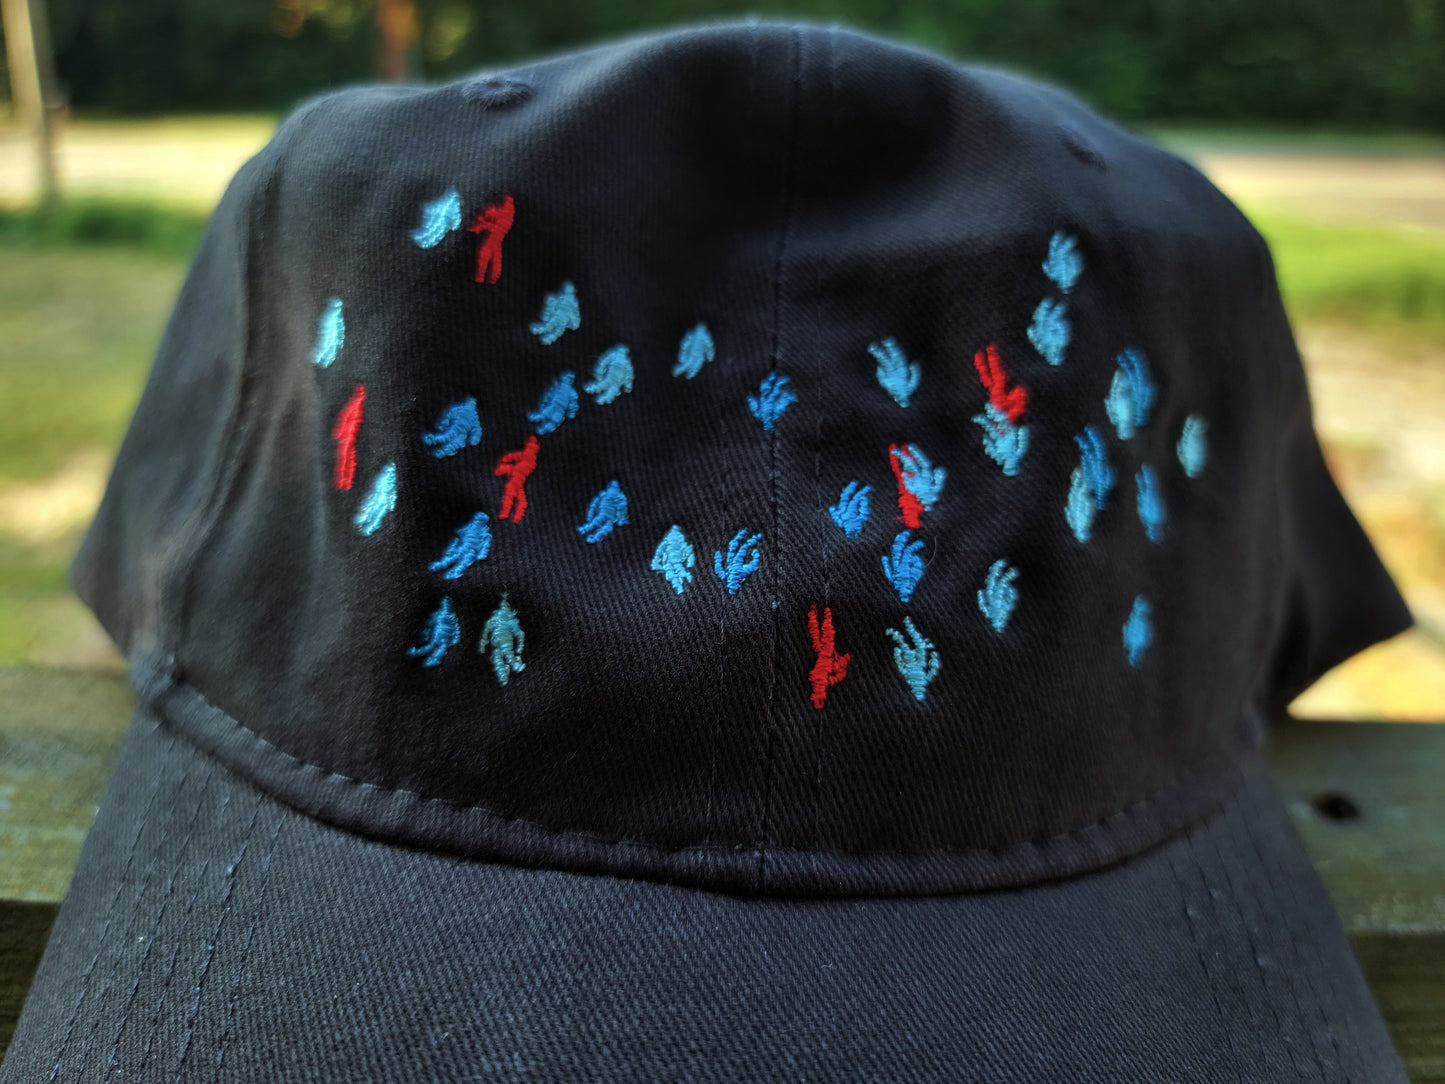 Rising/Falling Figures Brushed Twill Cap - Bright Eyes Inspired Embroidered Brushed Twill Cap